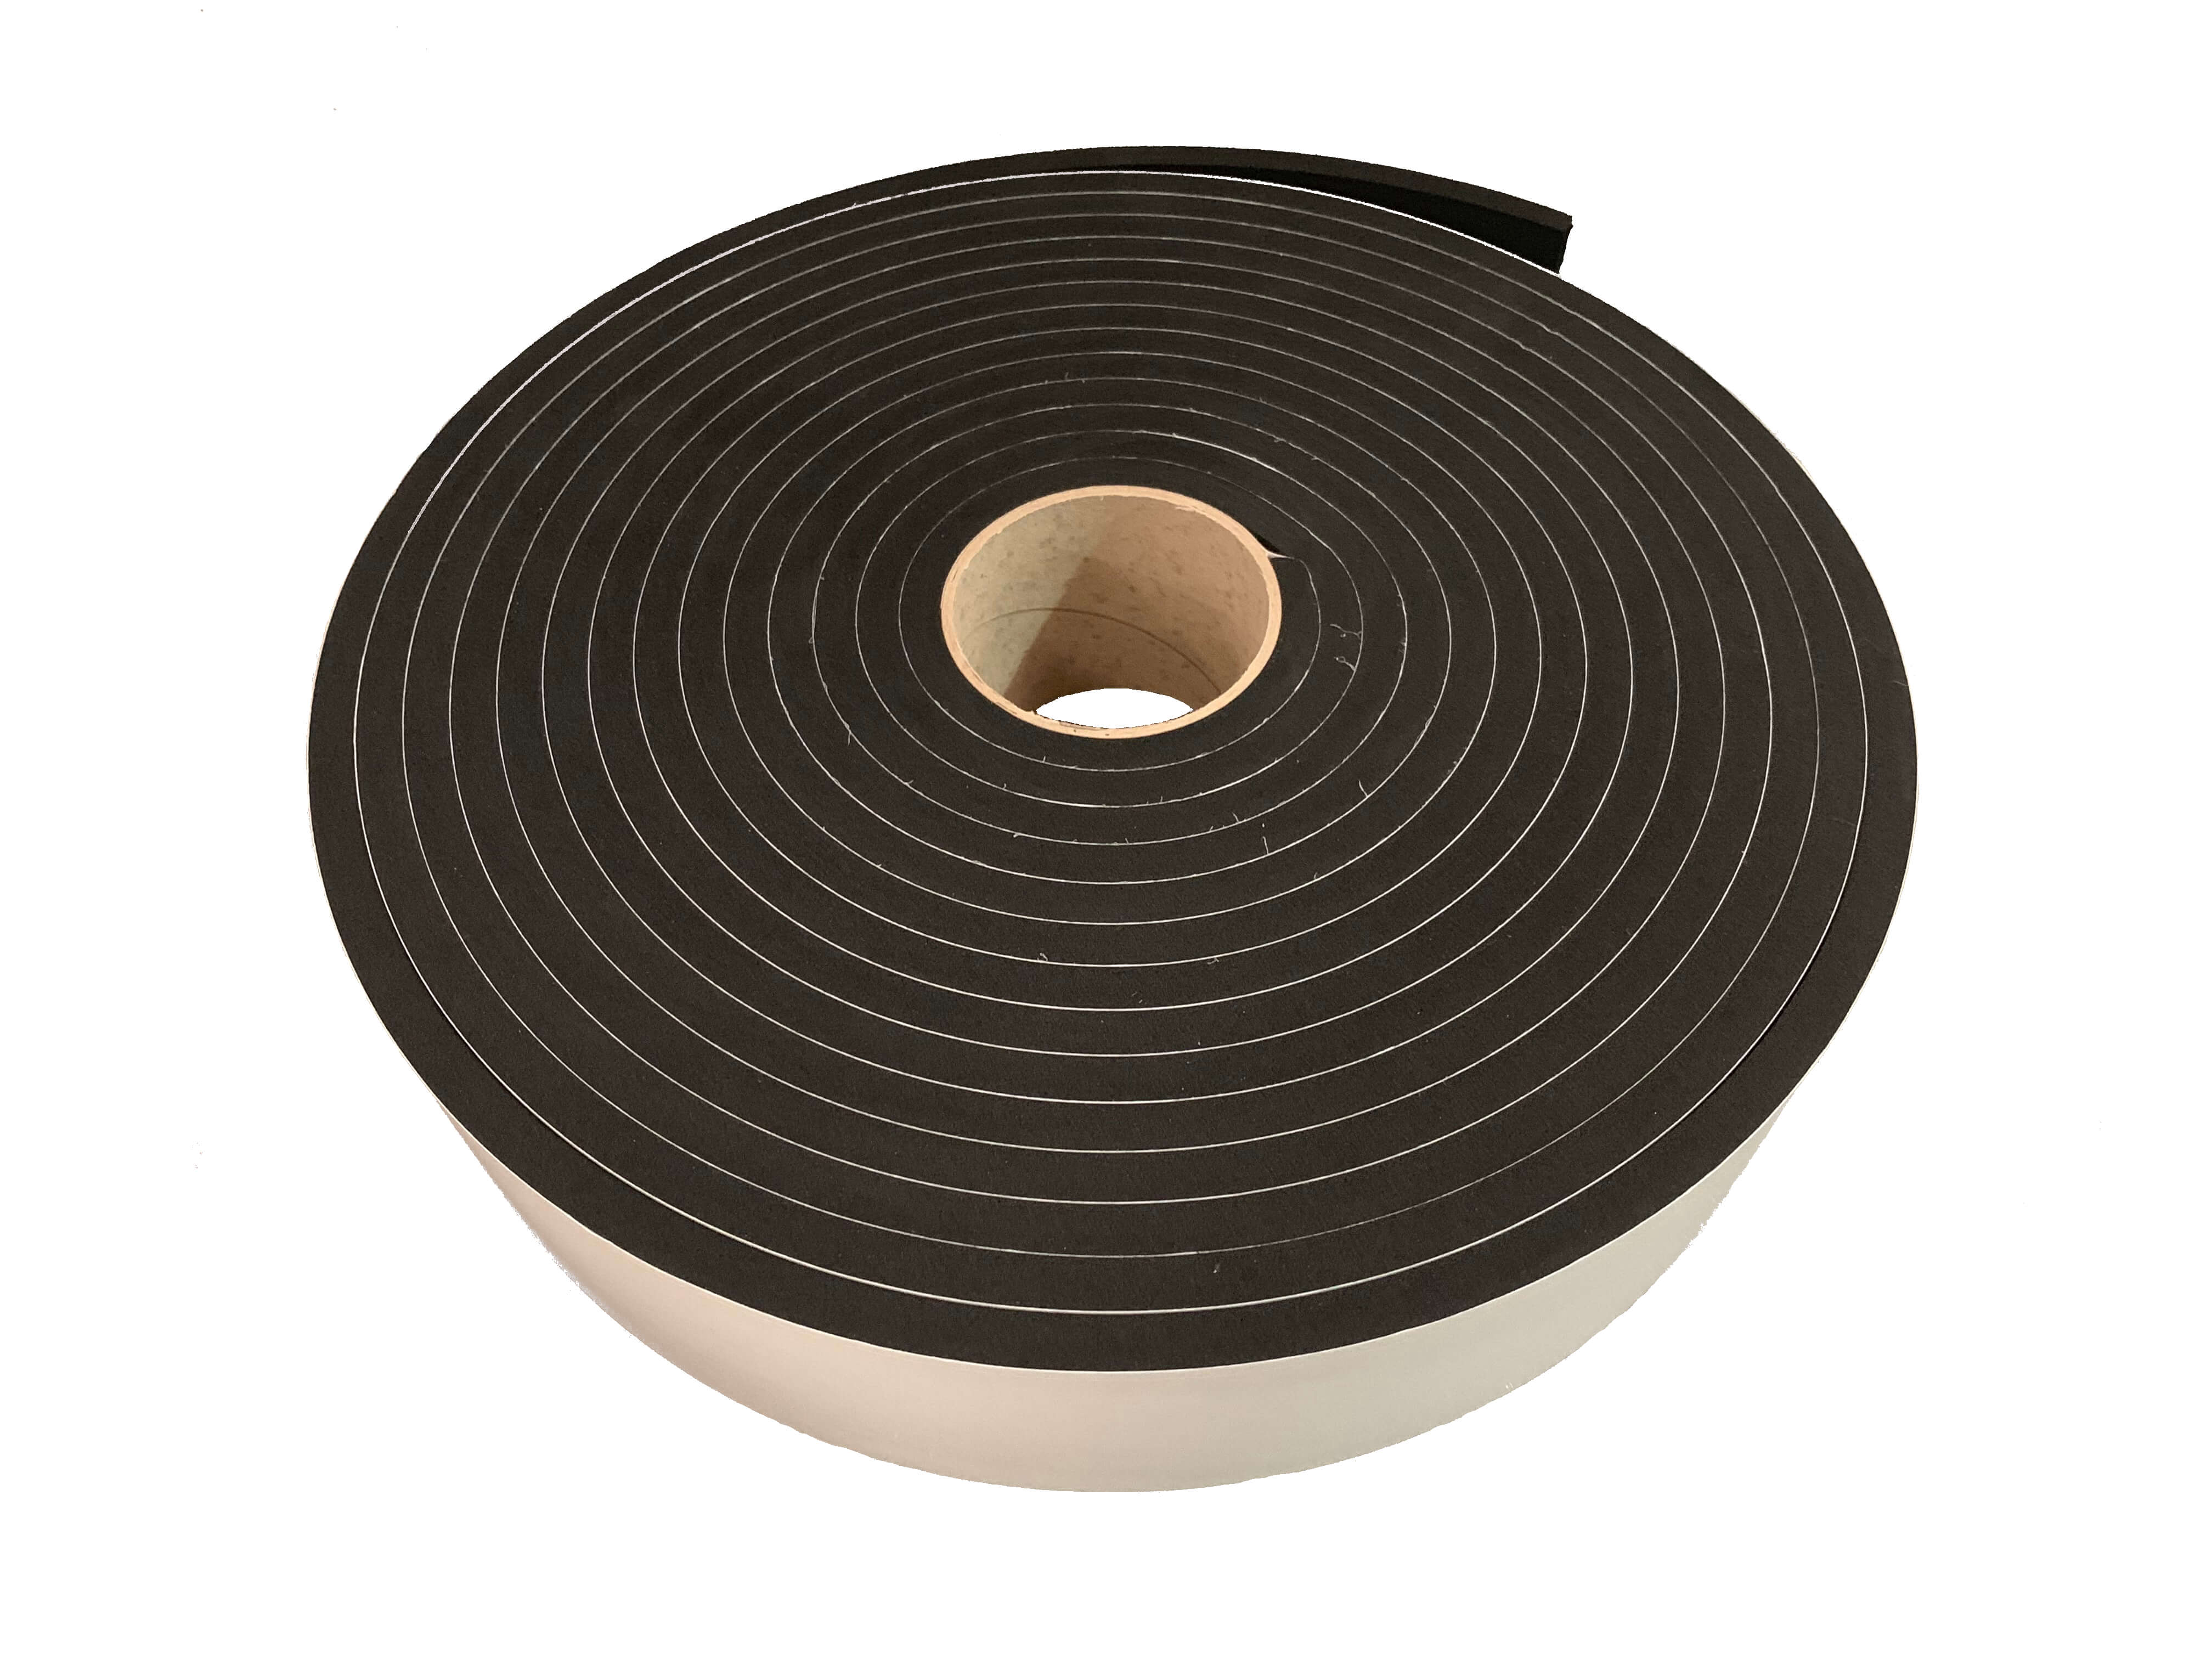 Resilient Sealing Tape - 10mm thick x 75mm wide x 10m long